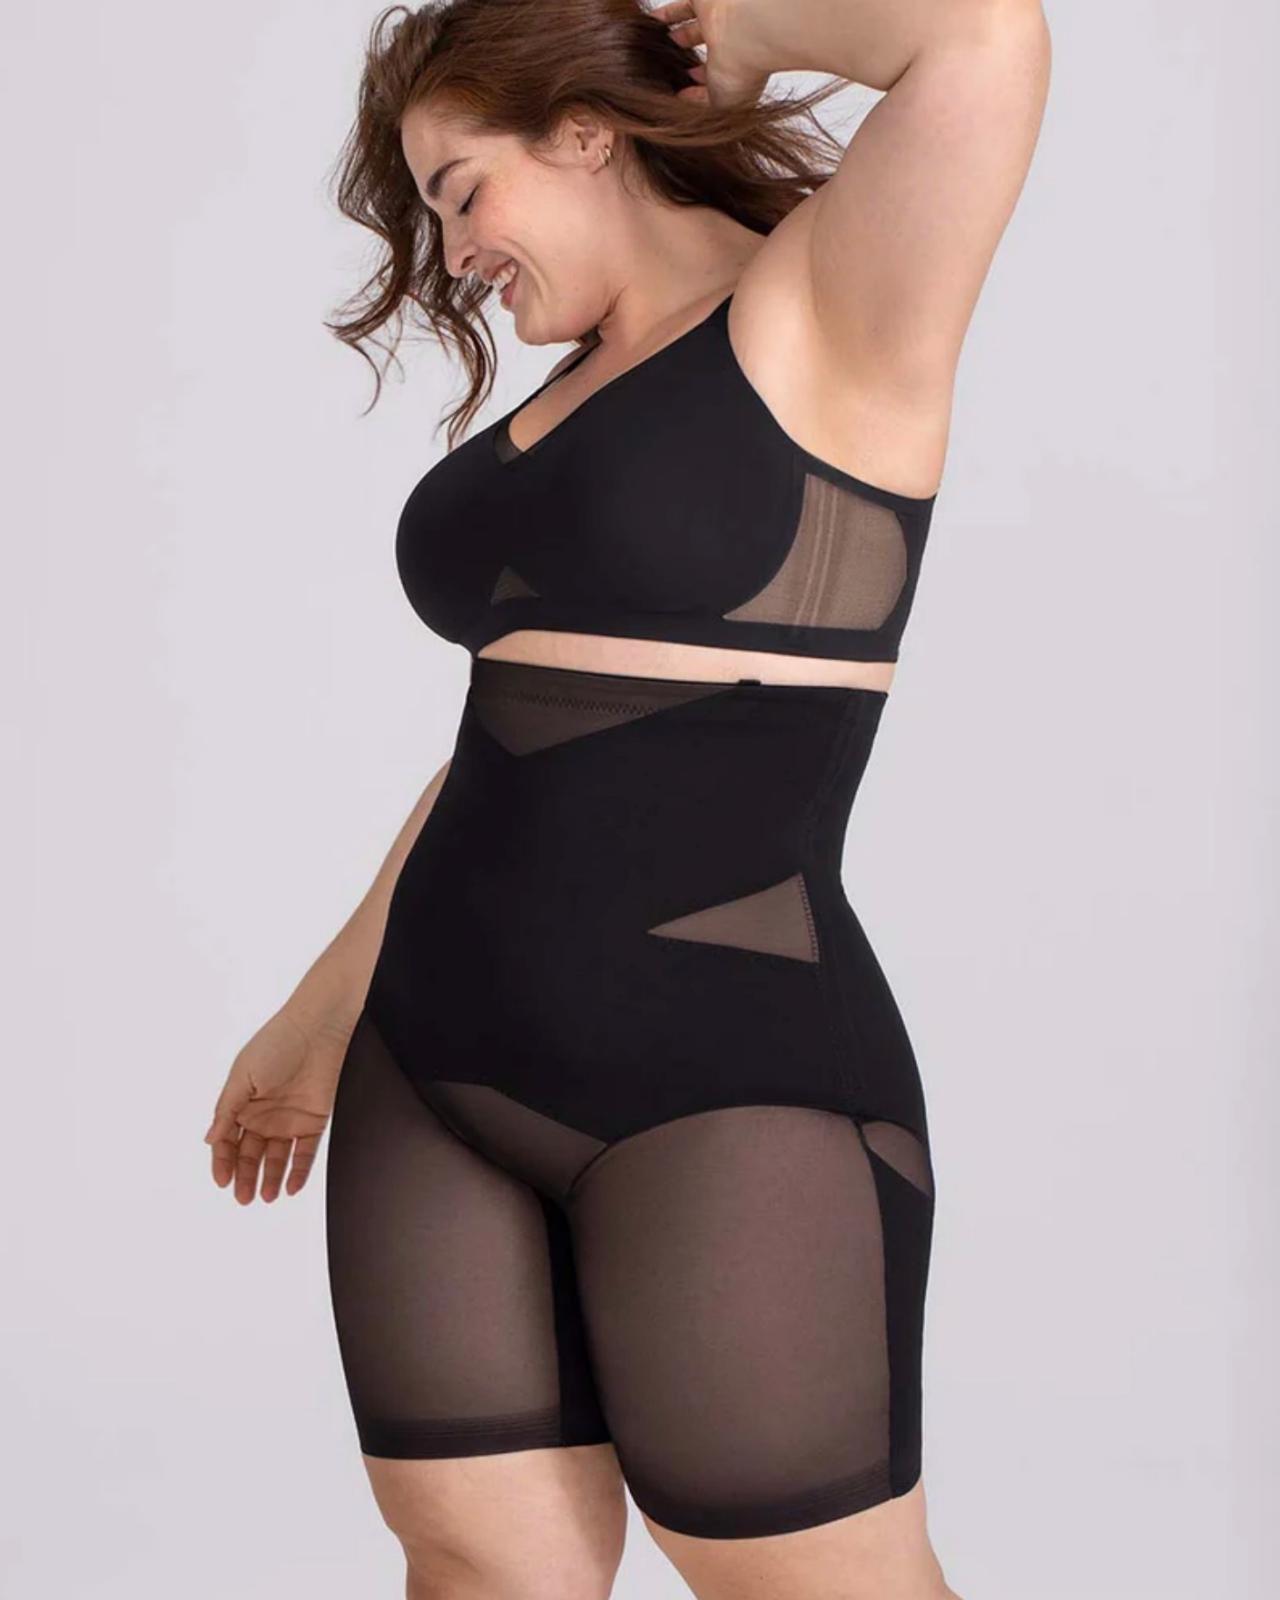 30+ Plus-Size Shapewear Reviewers Love Fashion - 22 Words